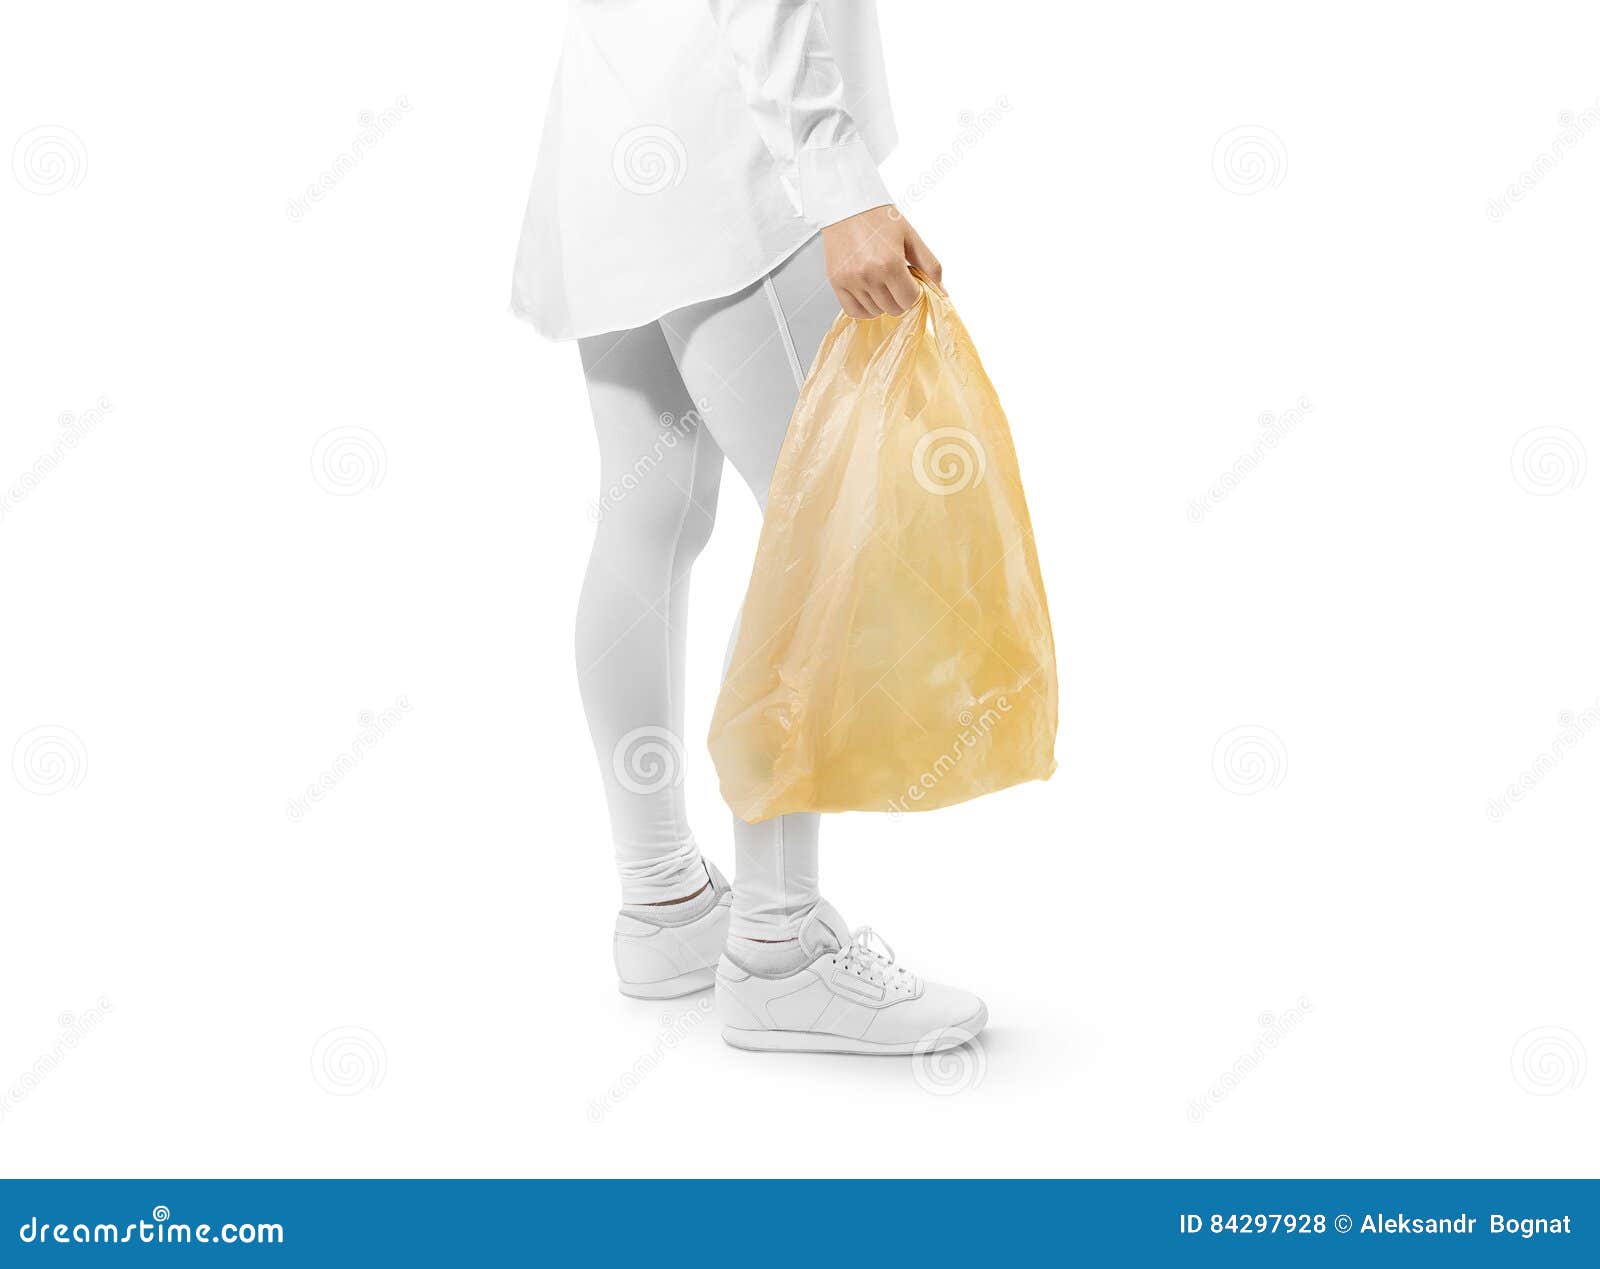 Download 1 945 Sac Bag Photos Free Royalty Free Stock Photos From Dreamstime